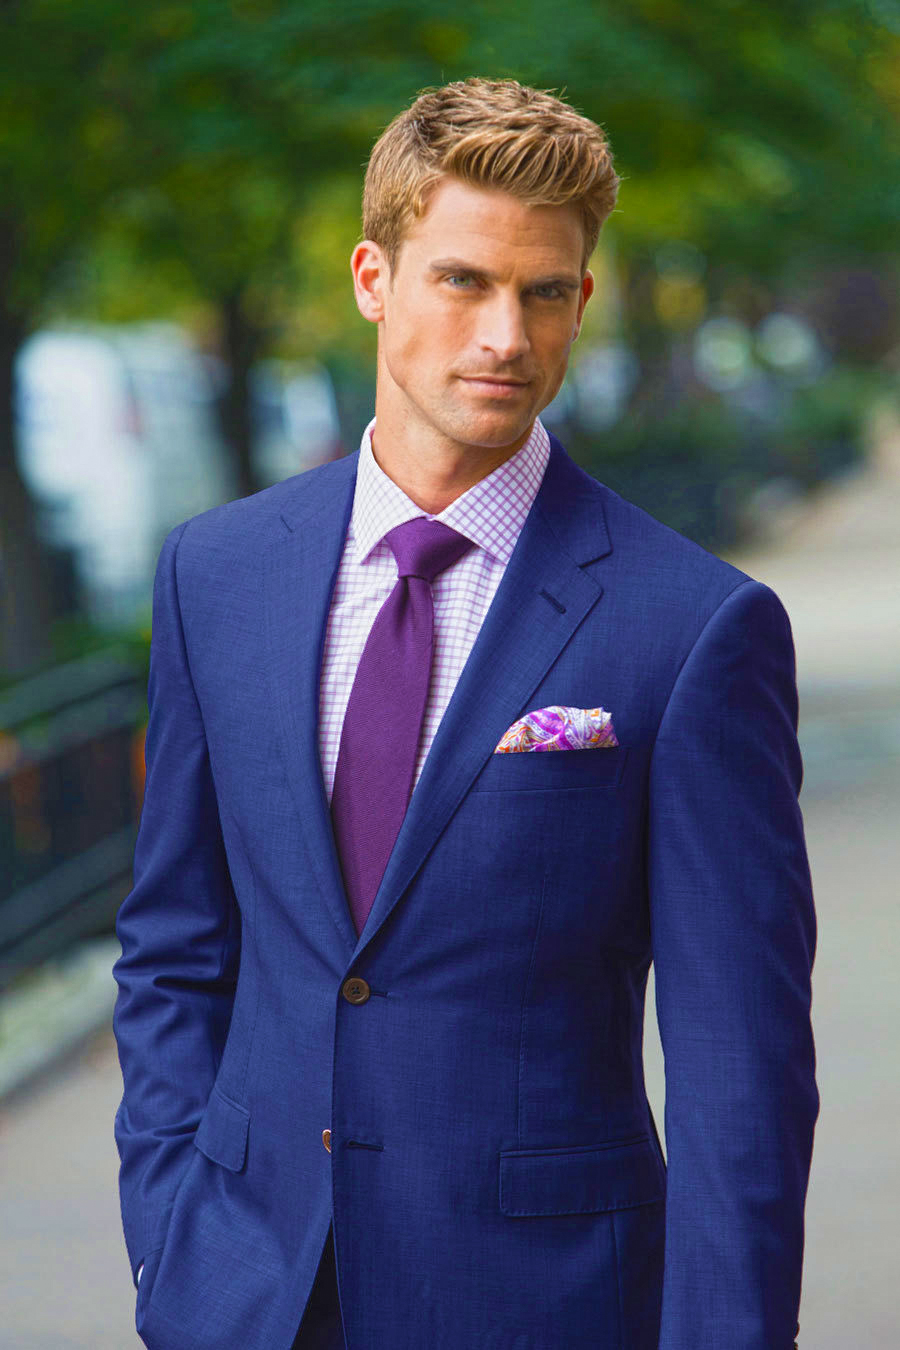 What color tie to wear with navy suit - Buy and Slay